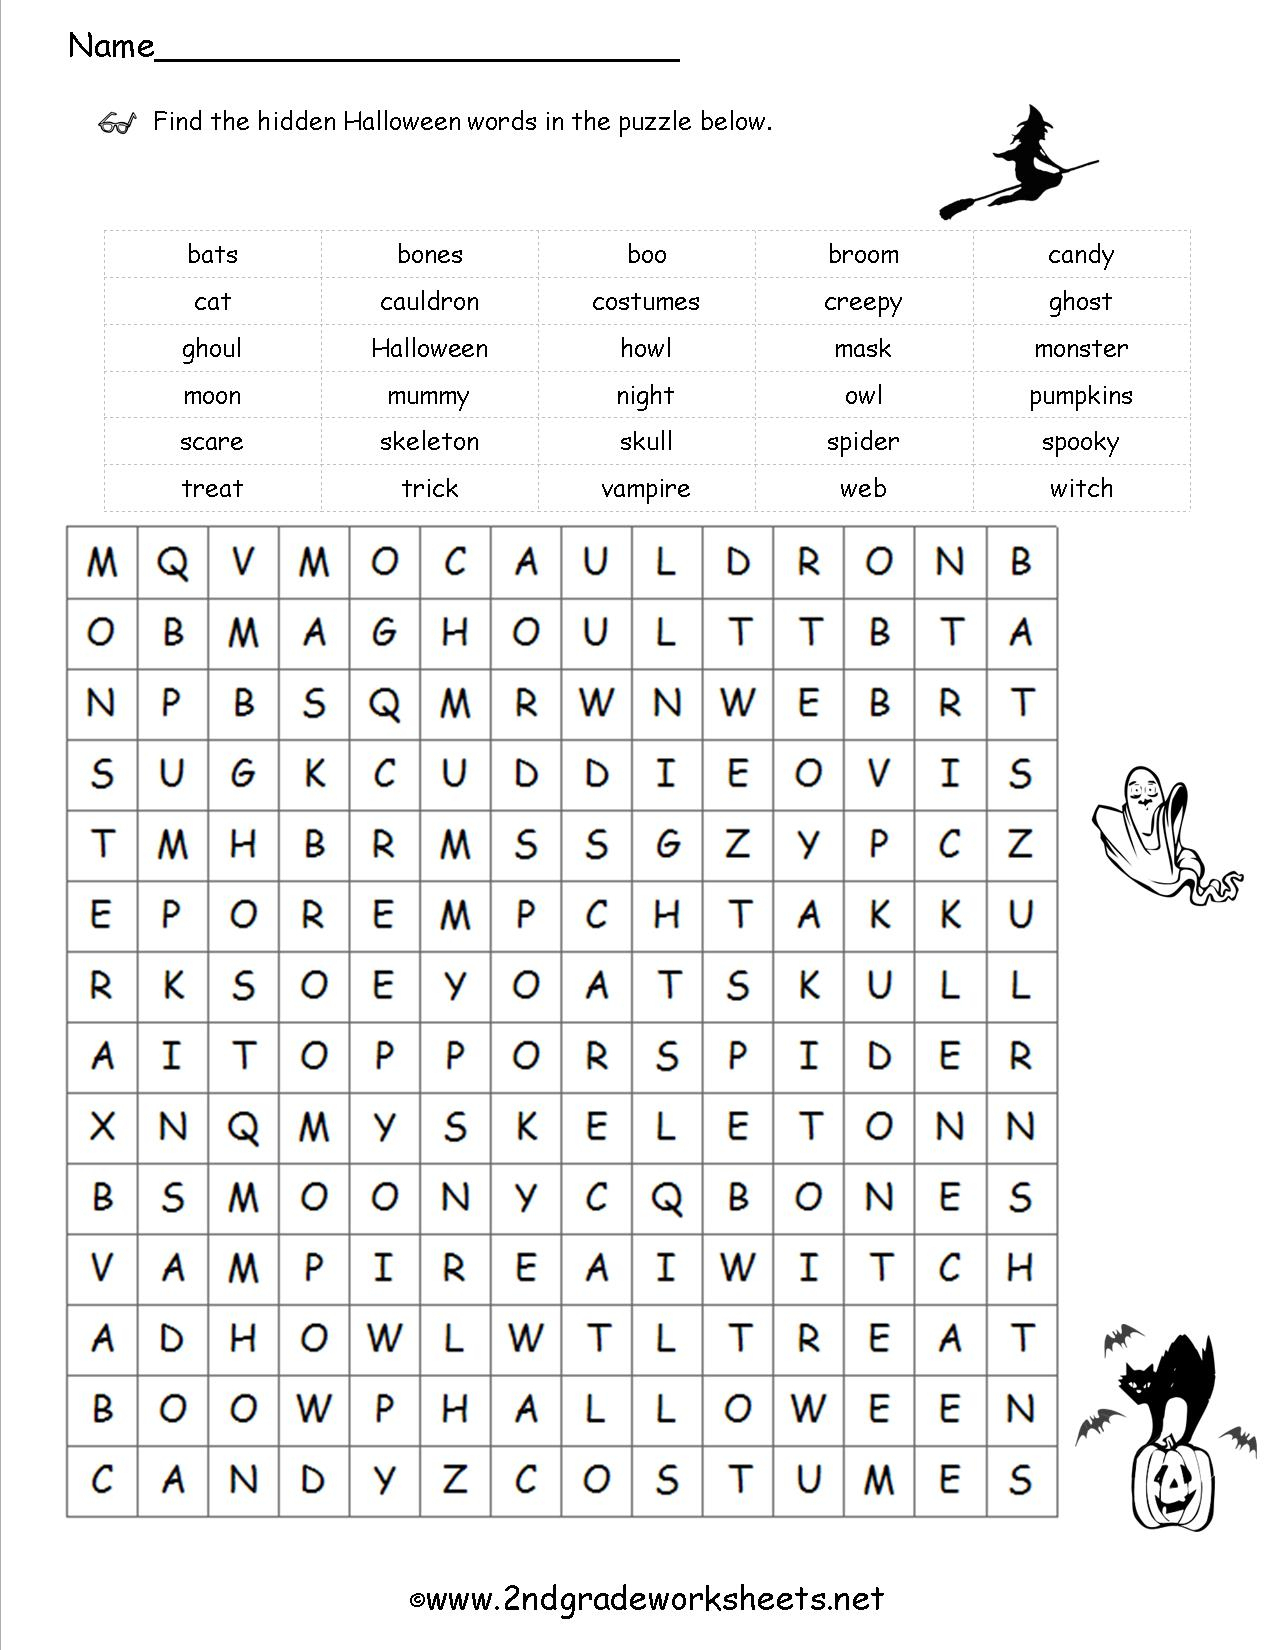 Halloween Worksheets And Printouts - Printable Crossword Puzzle For 2Nd Graders